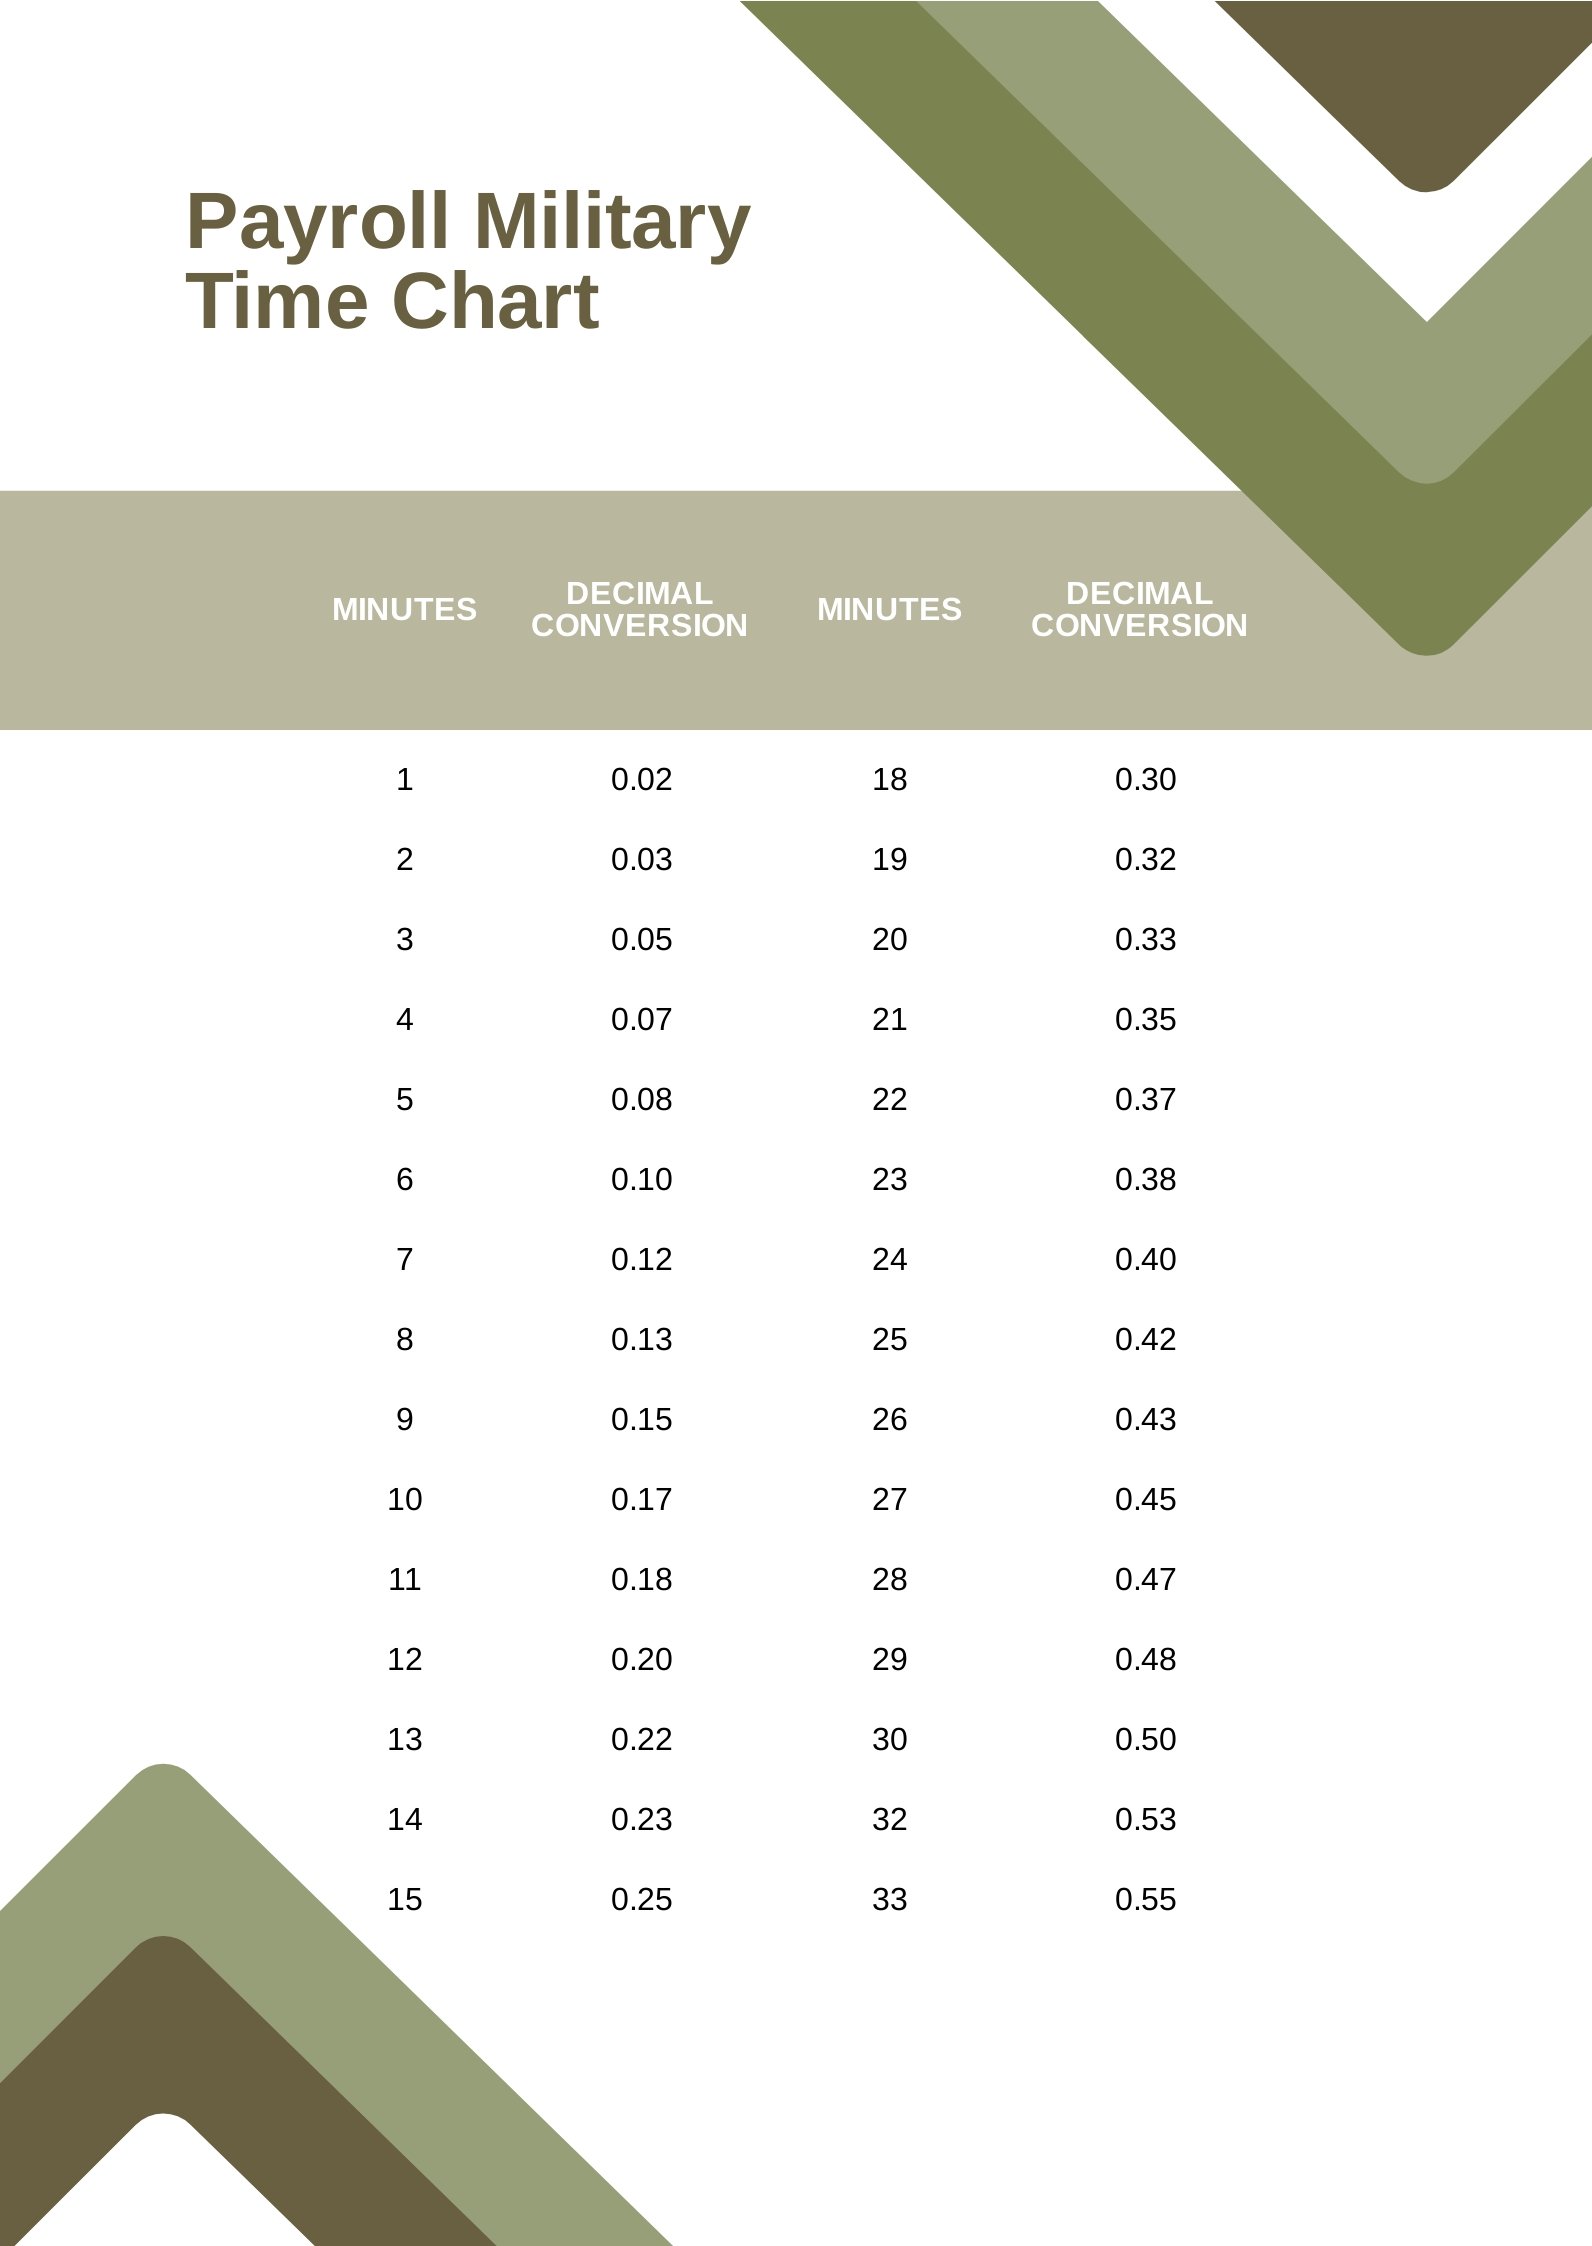 Payroll Military Time Chart in PDF